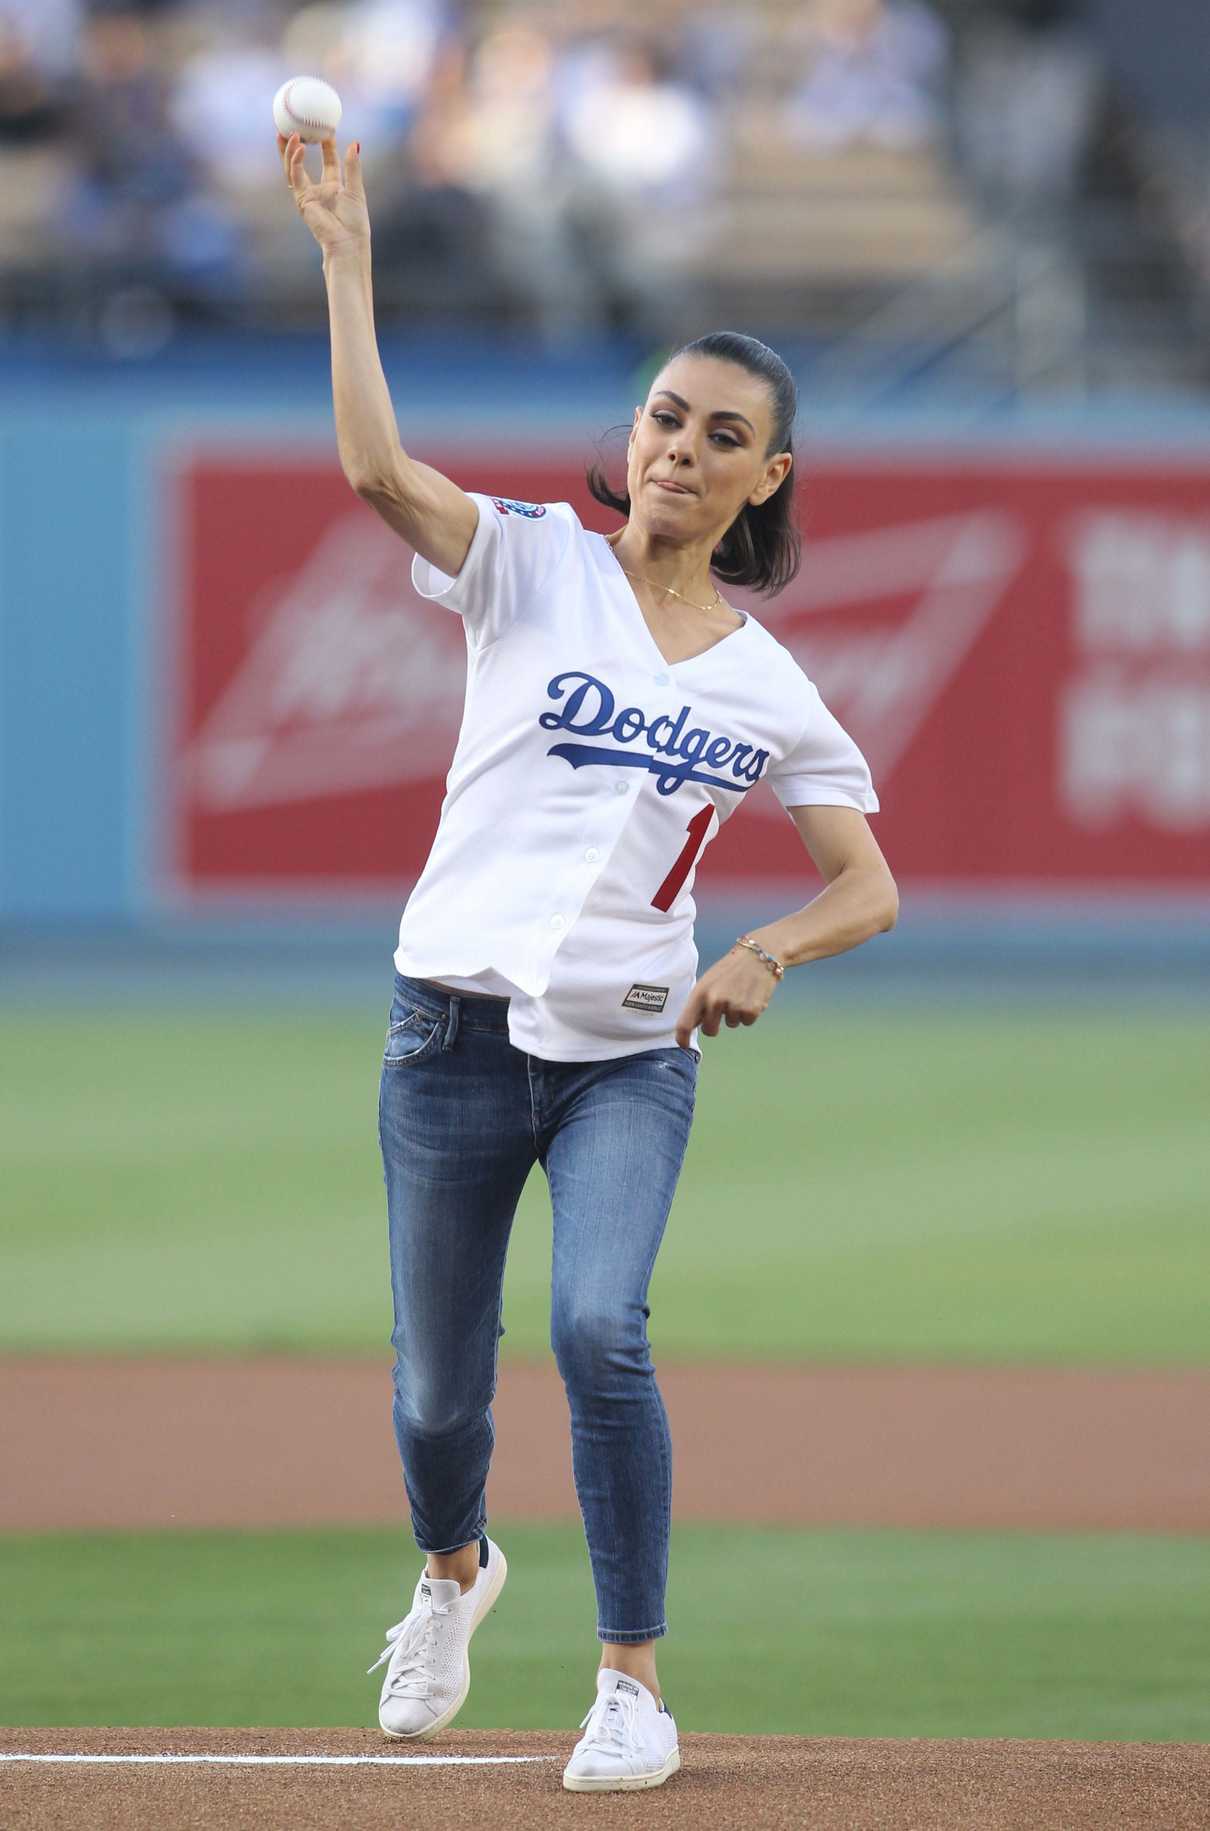 Mila Kunis Throws Out the 1st Pitch Before the Game at Dodger Stadium in Los Angeles 06/29/2018-4